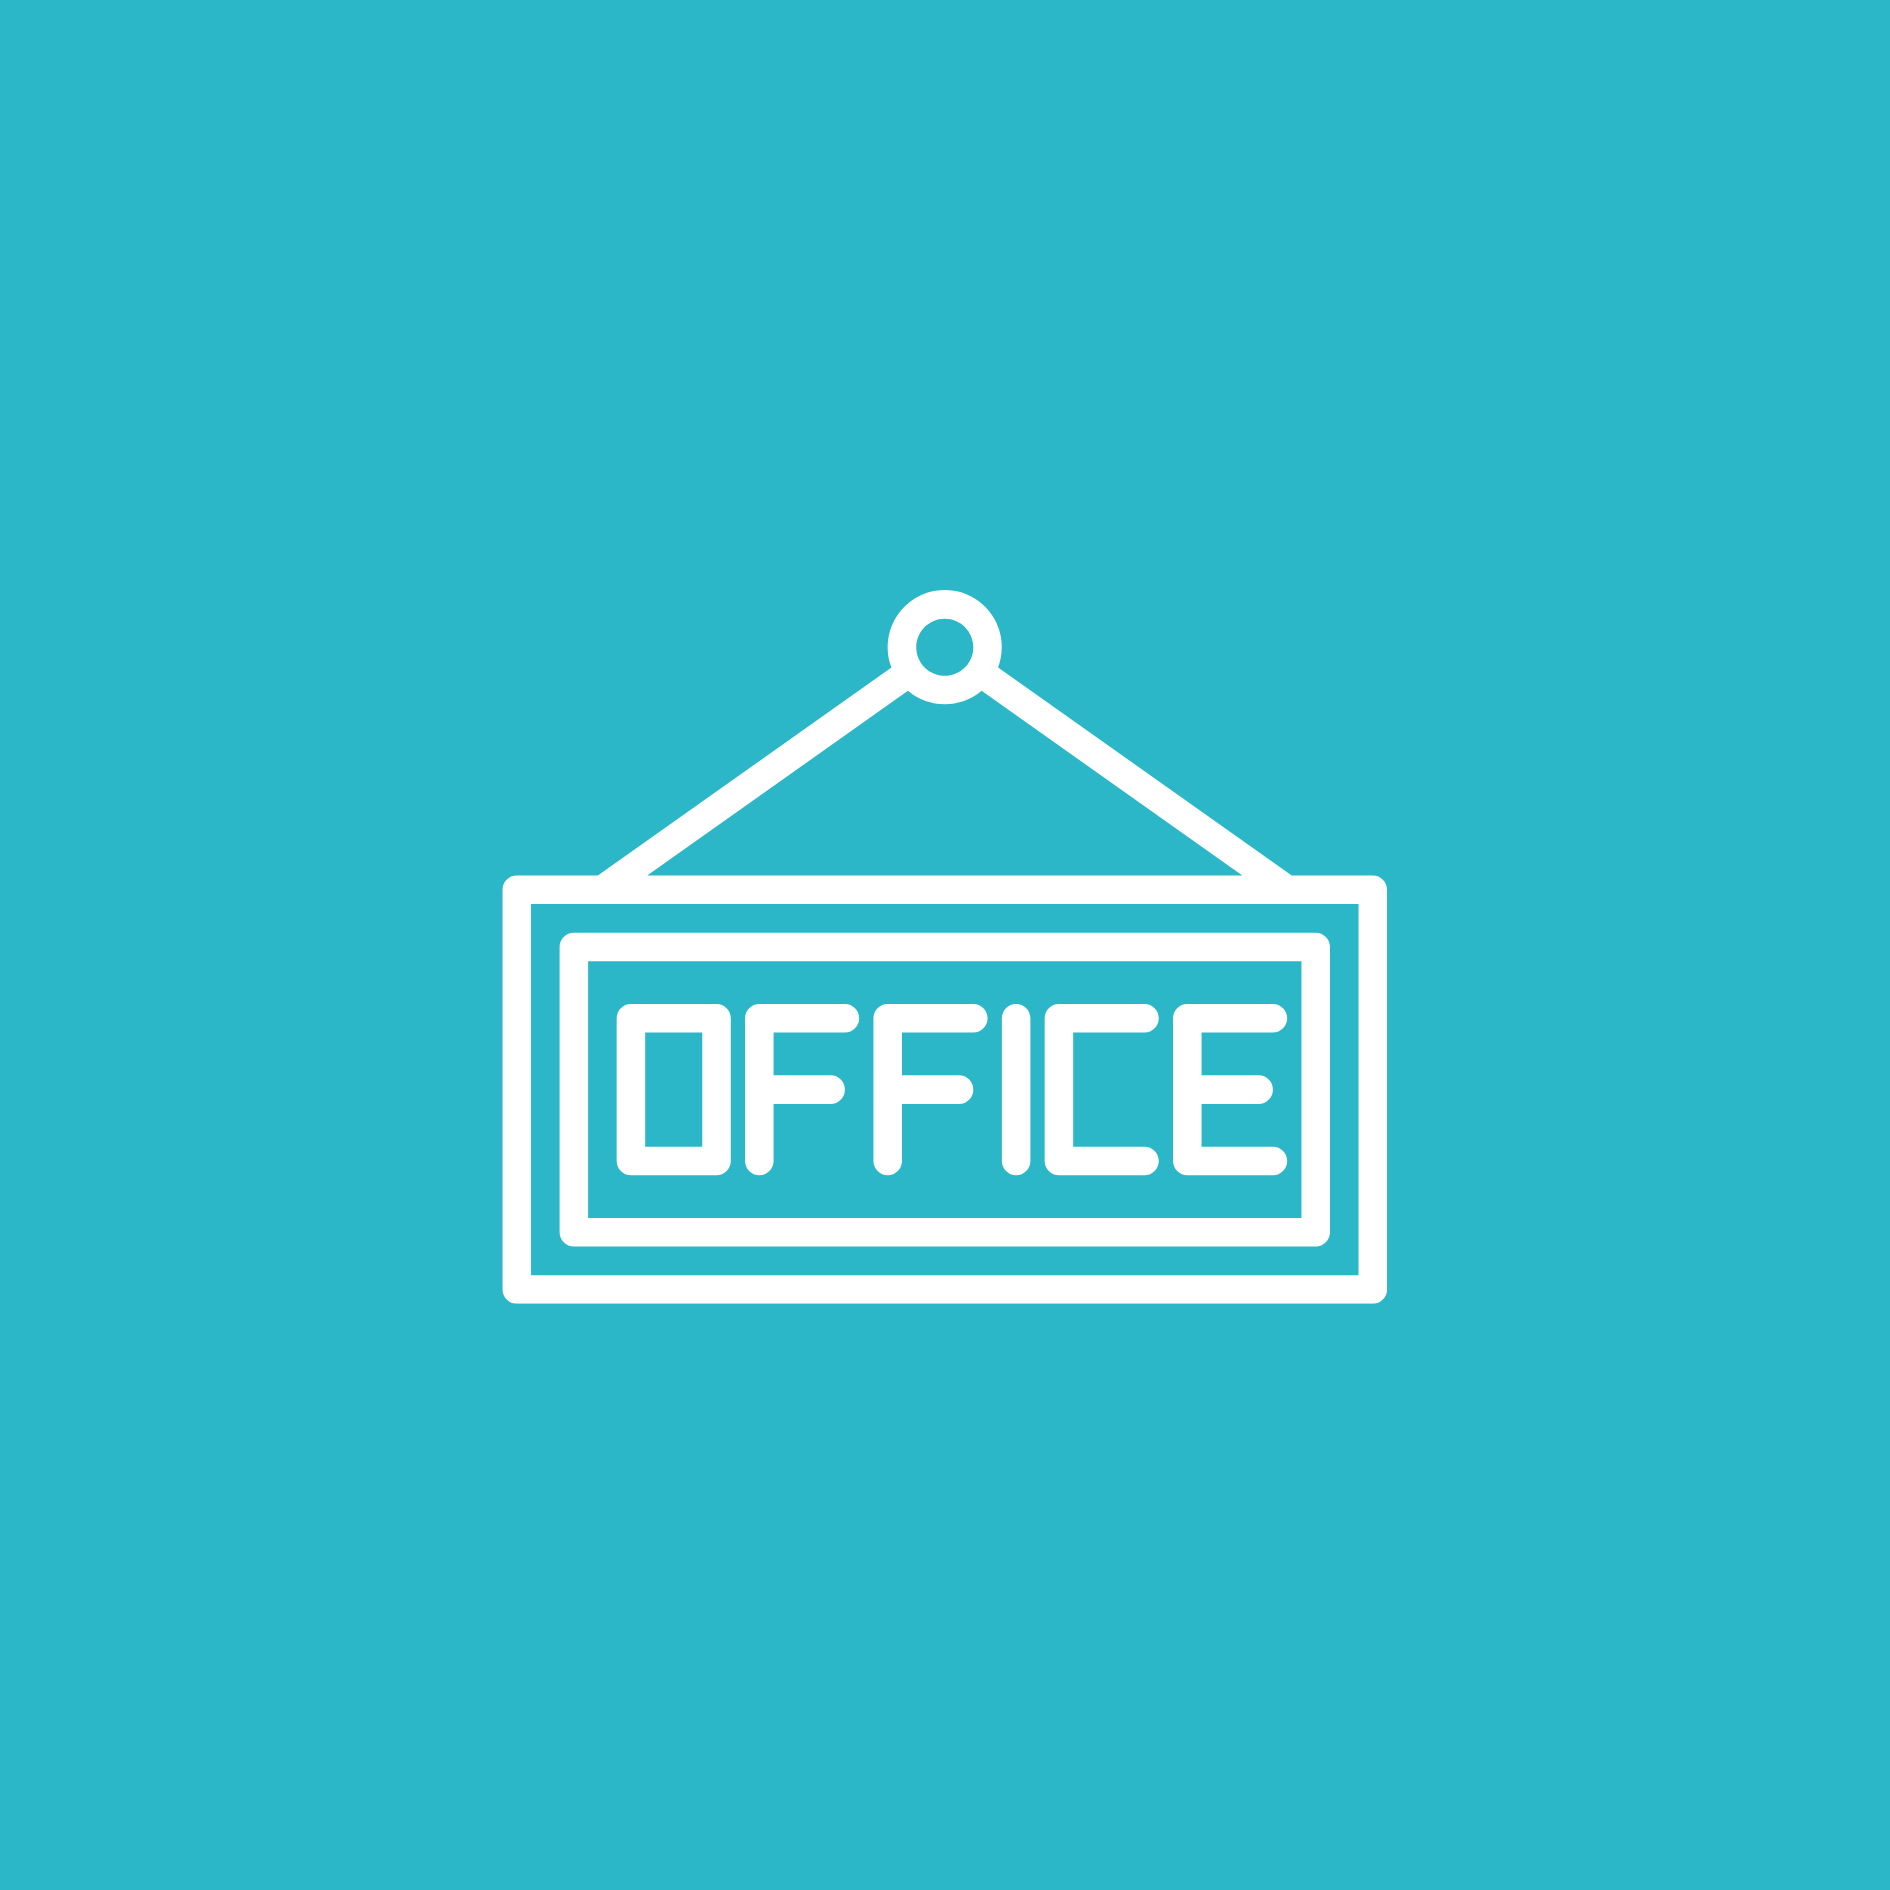 A white line icon of an office sign hanging on a blue background.